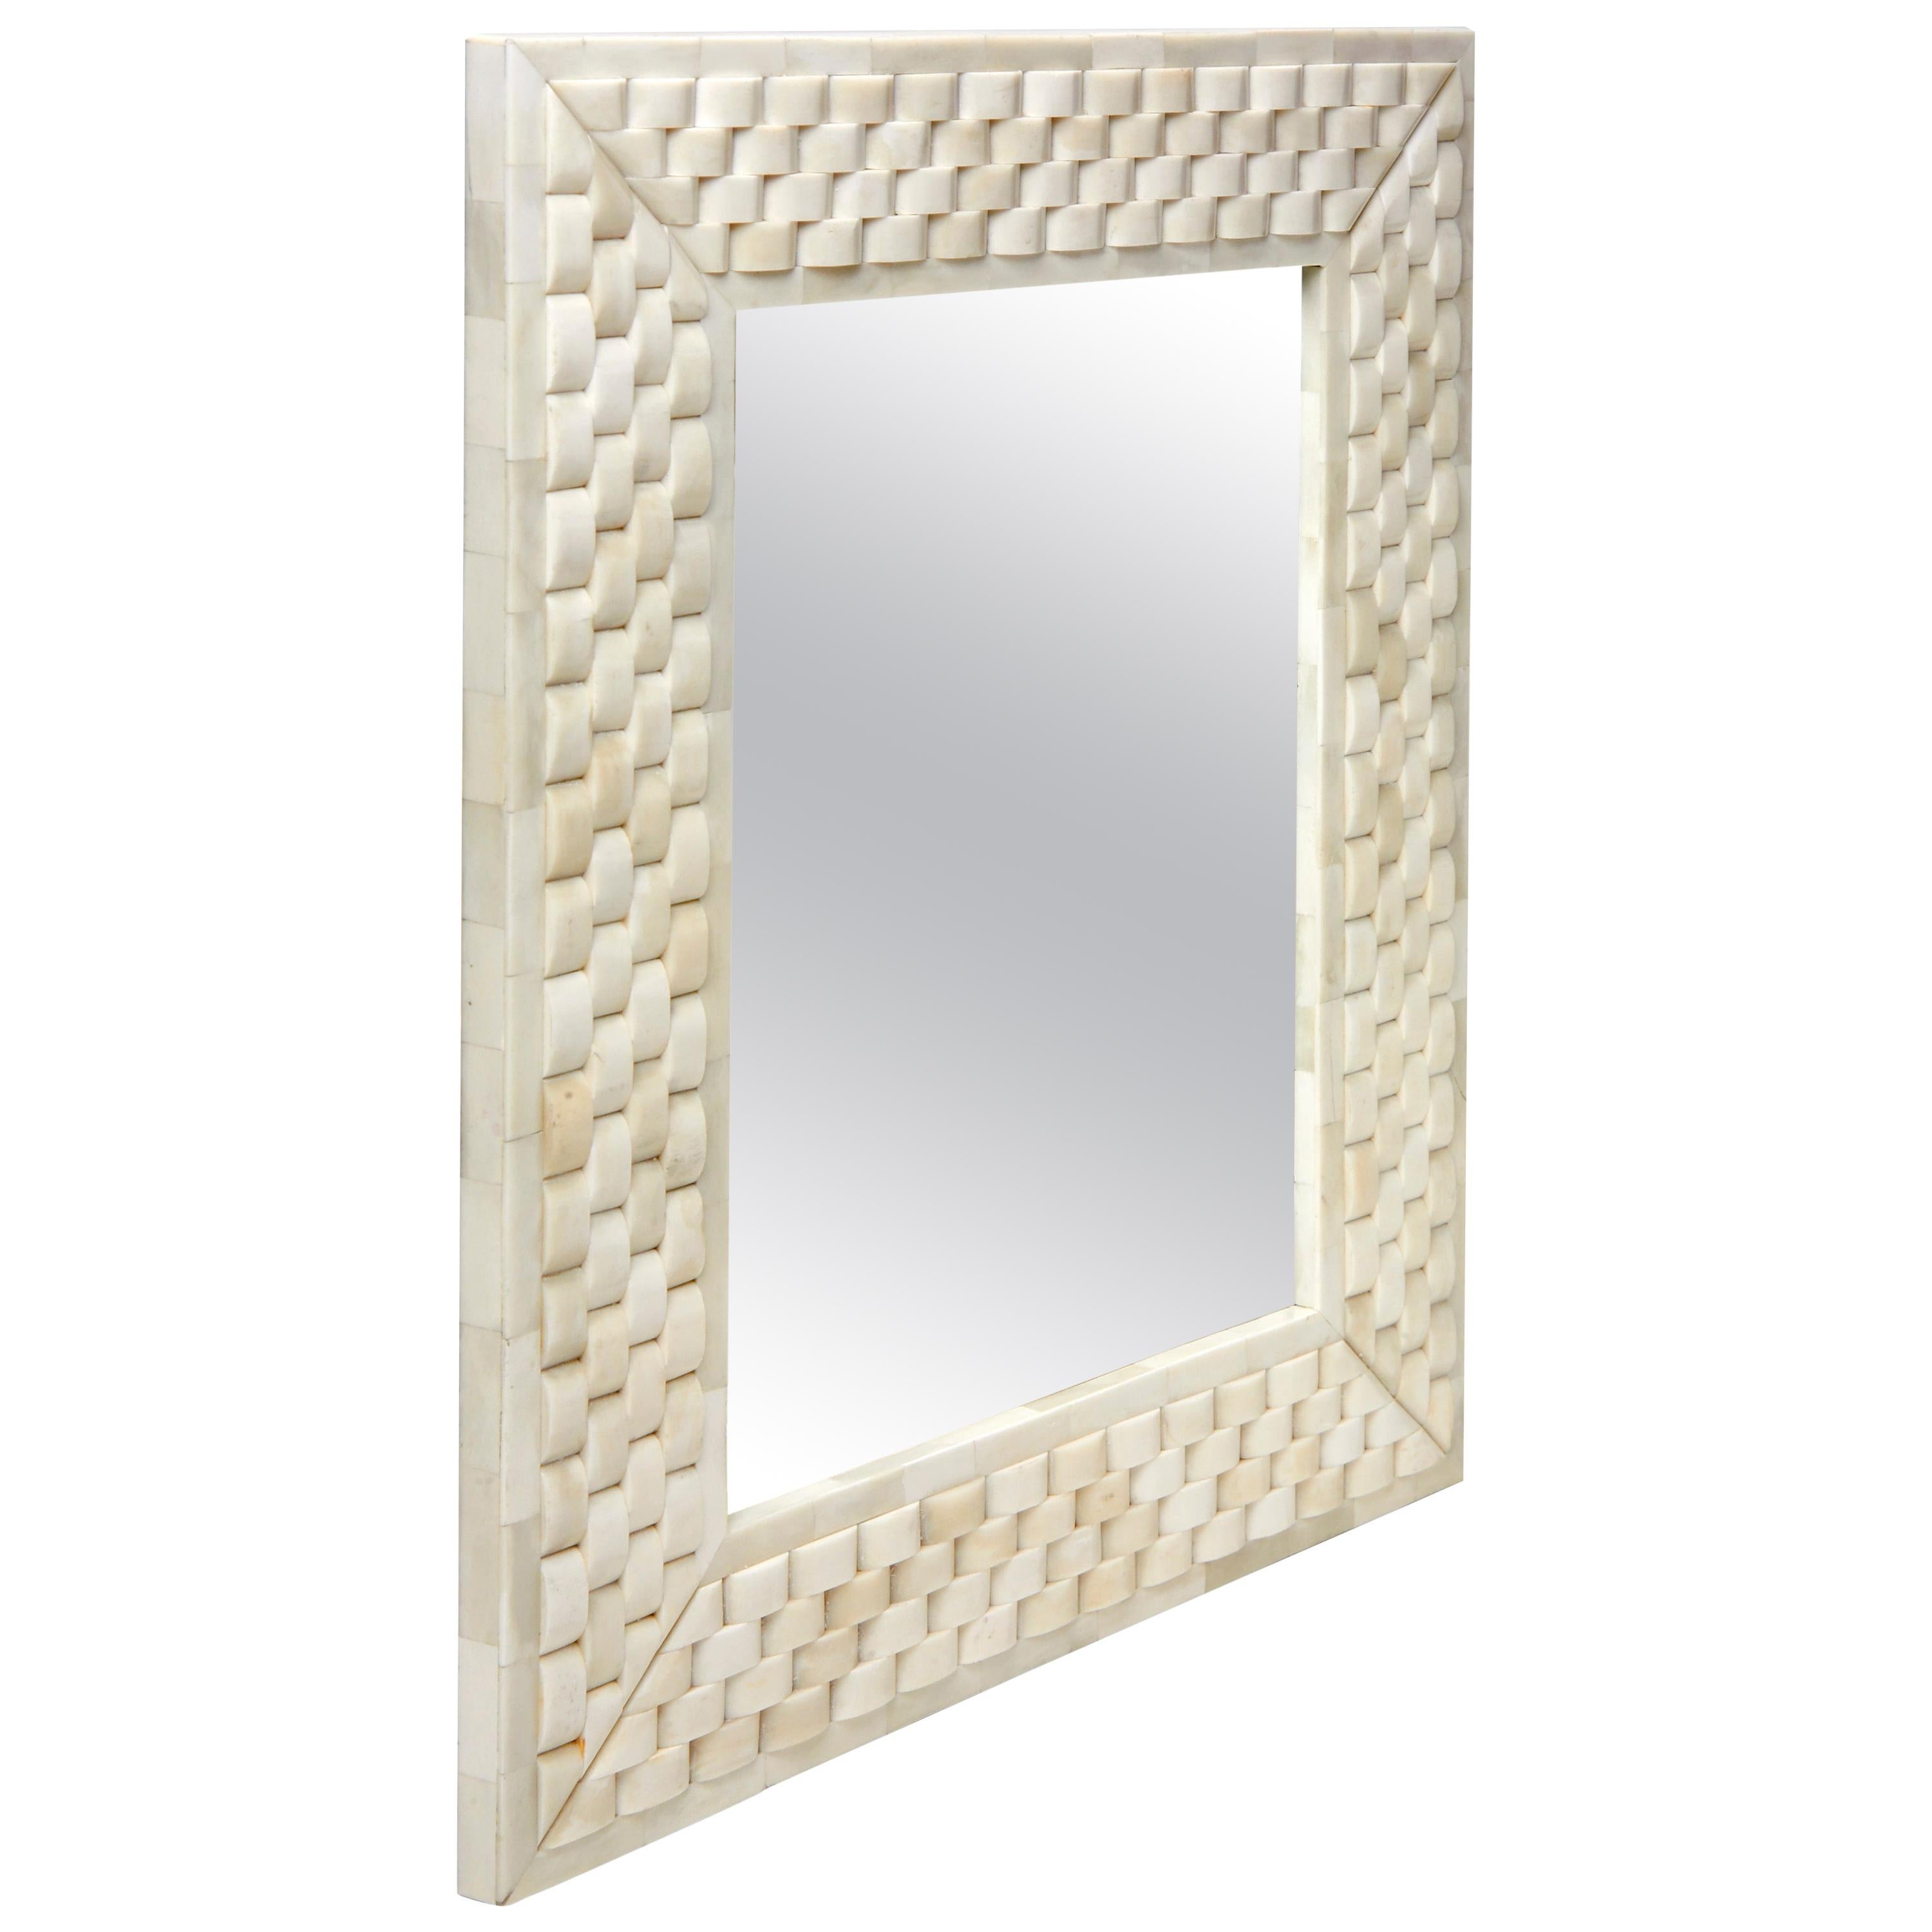 Mirror Frame Made with Carved Bone to Form Basket Weave- in stock